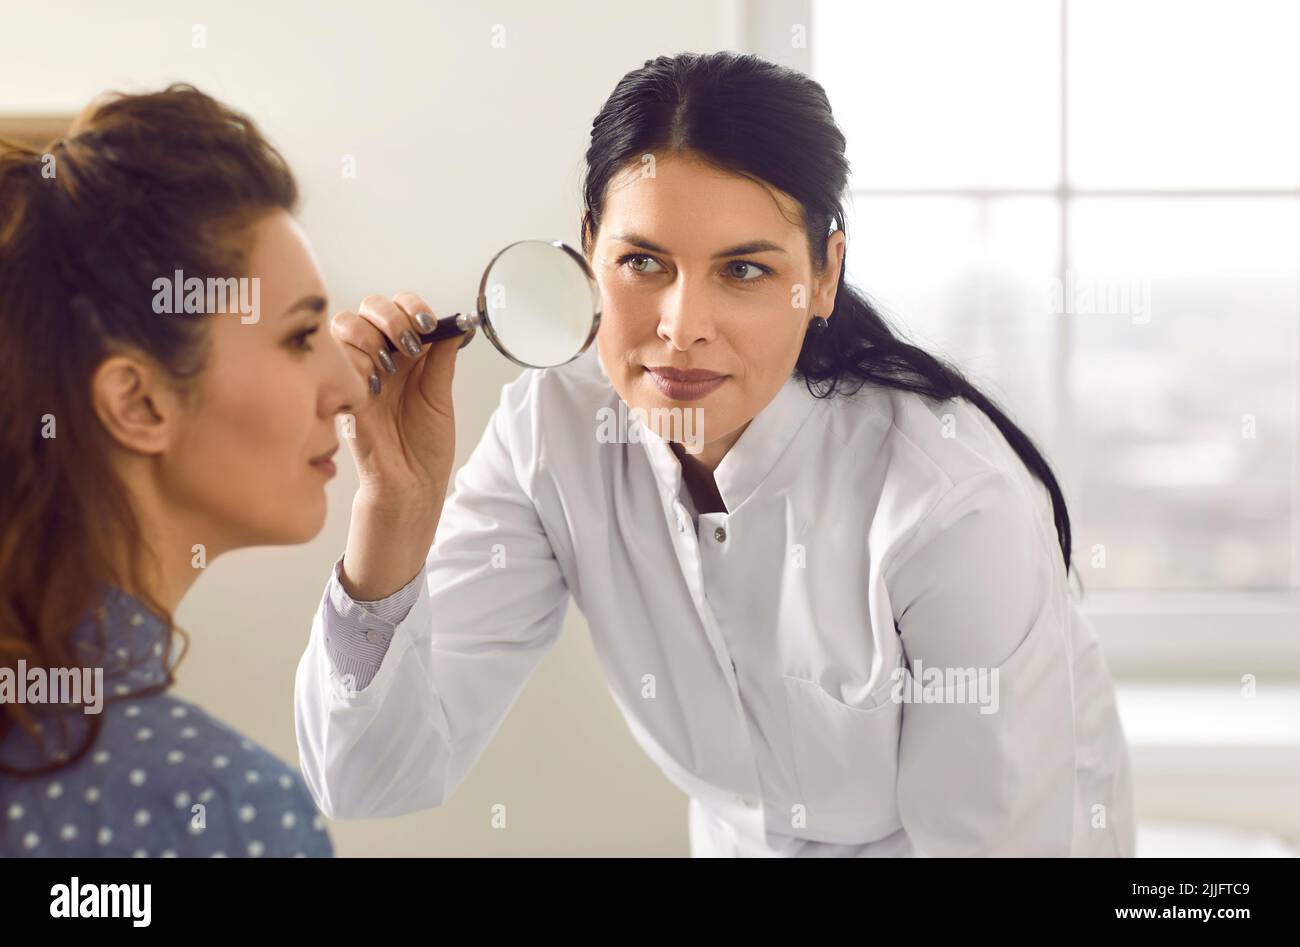 Dermatologist with magnifying glass looks at mole or pigmentation on woman's face Stock Photo